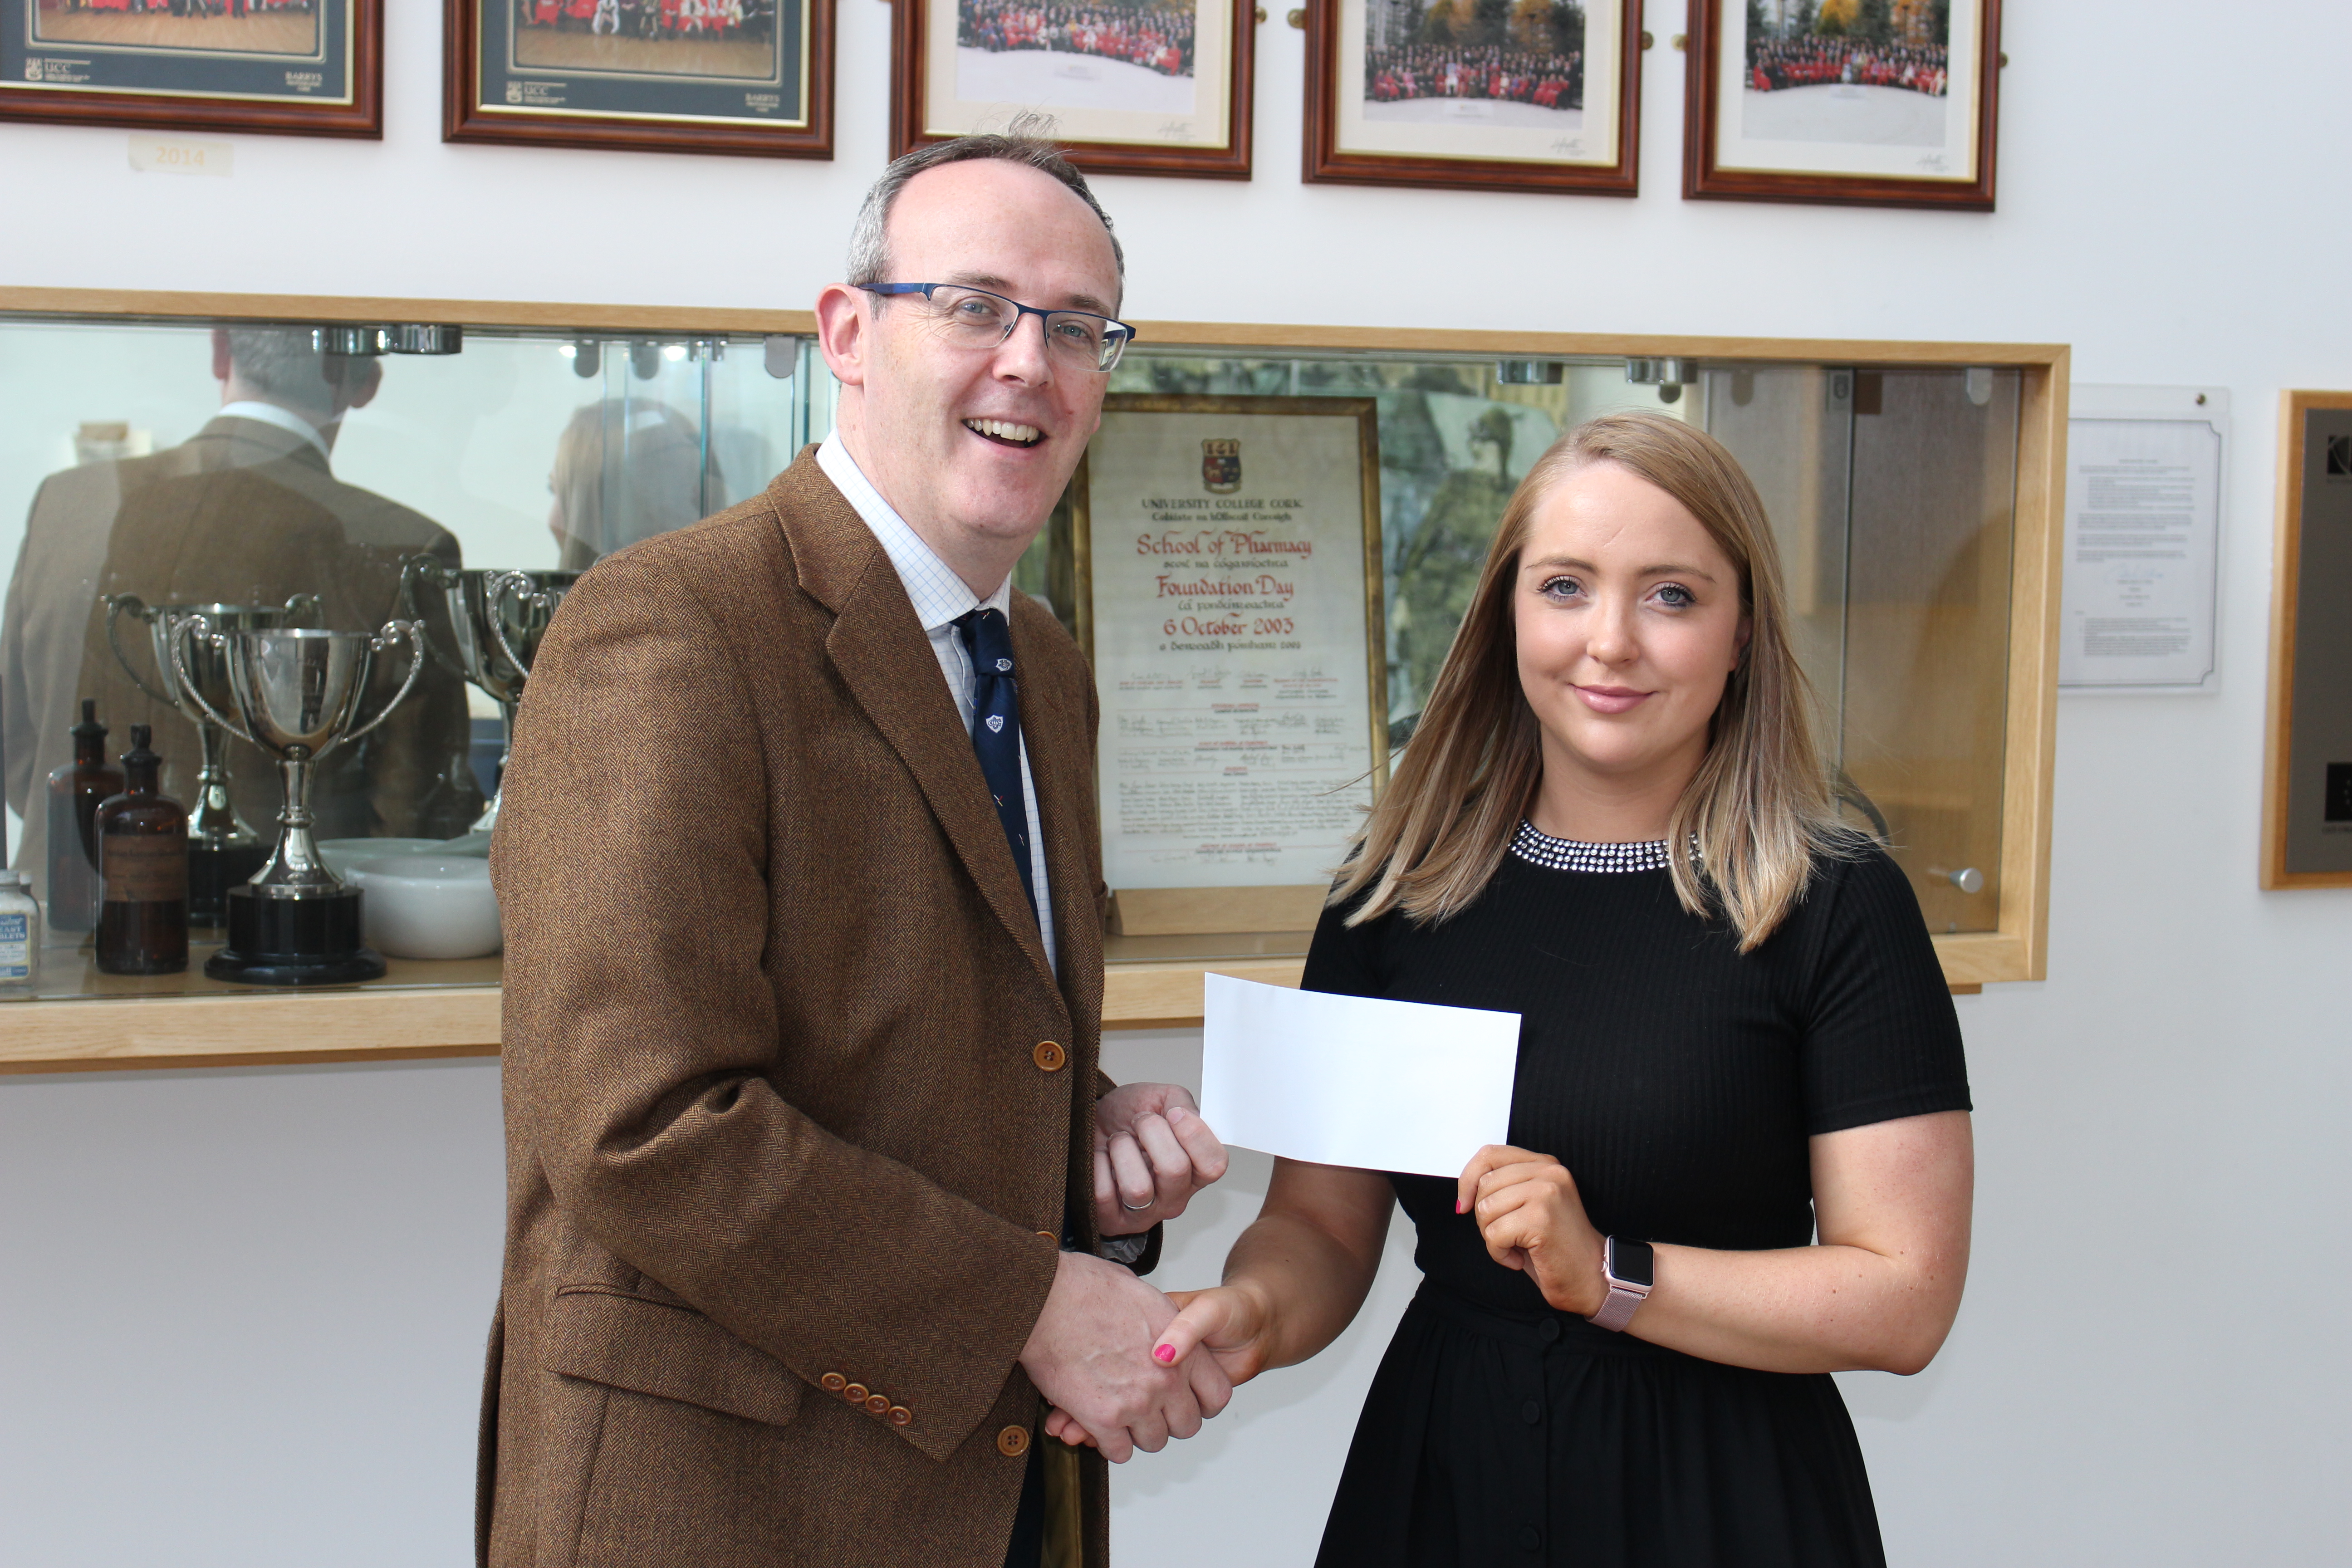 Anna Ni Raghallaigh was awarded one of the Peel Memorial Prizes 2018 for her contribution to student life within the University.